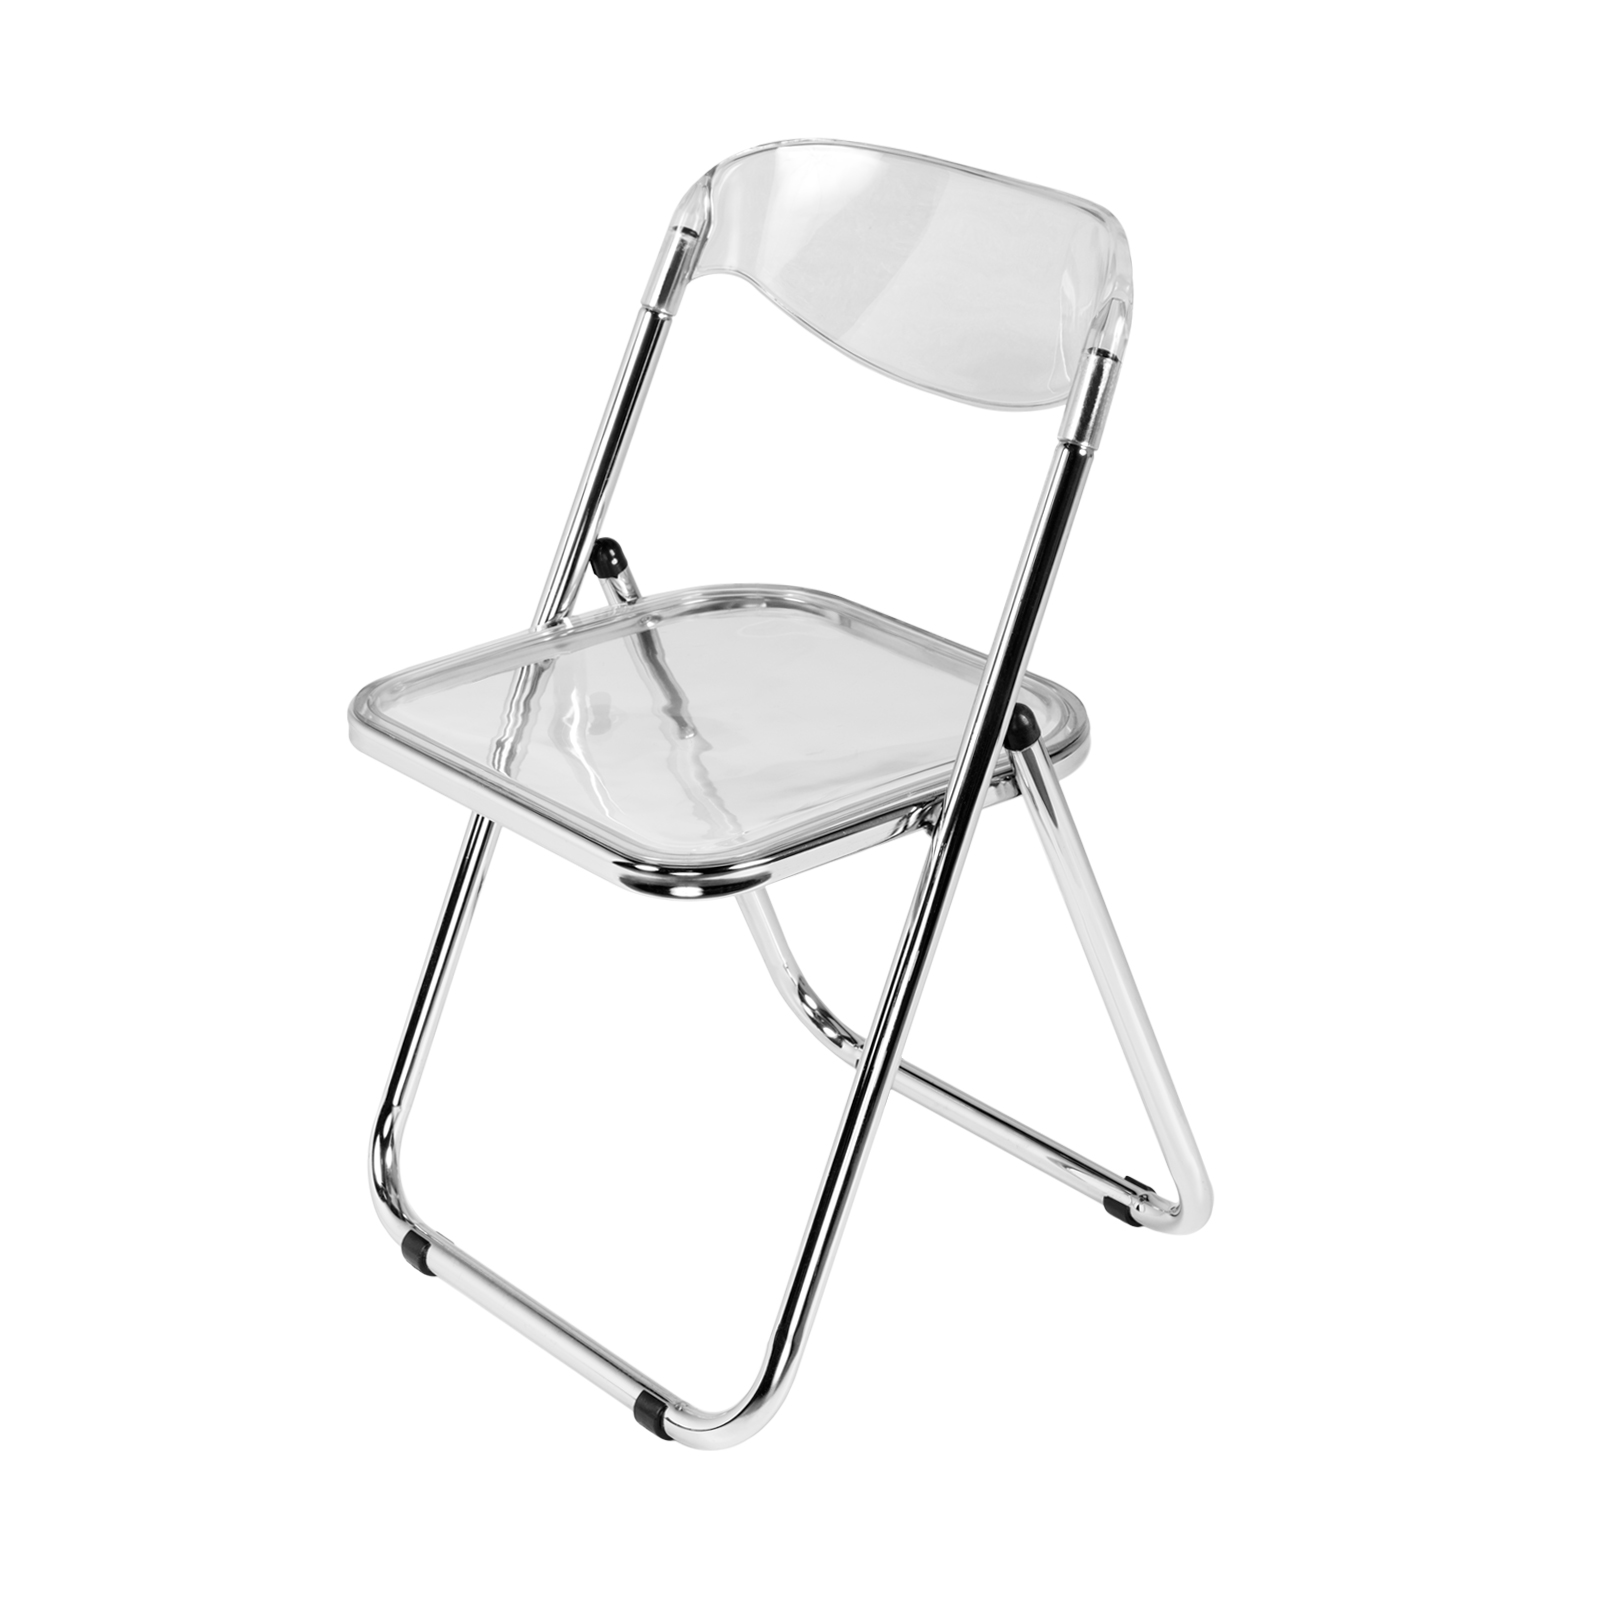 C10539 00 Lucite Folding Chair Rental Feature 